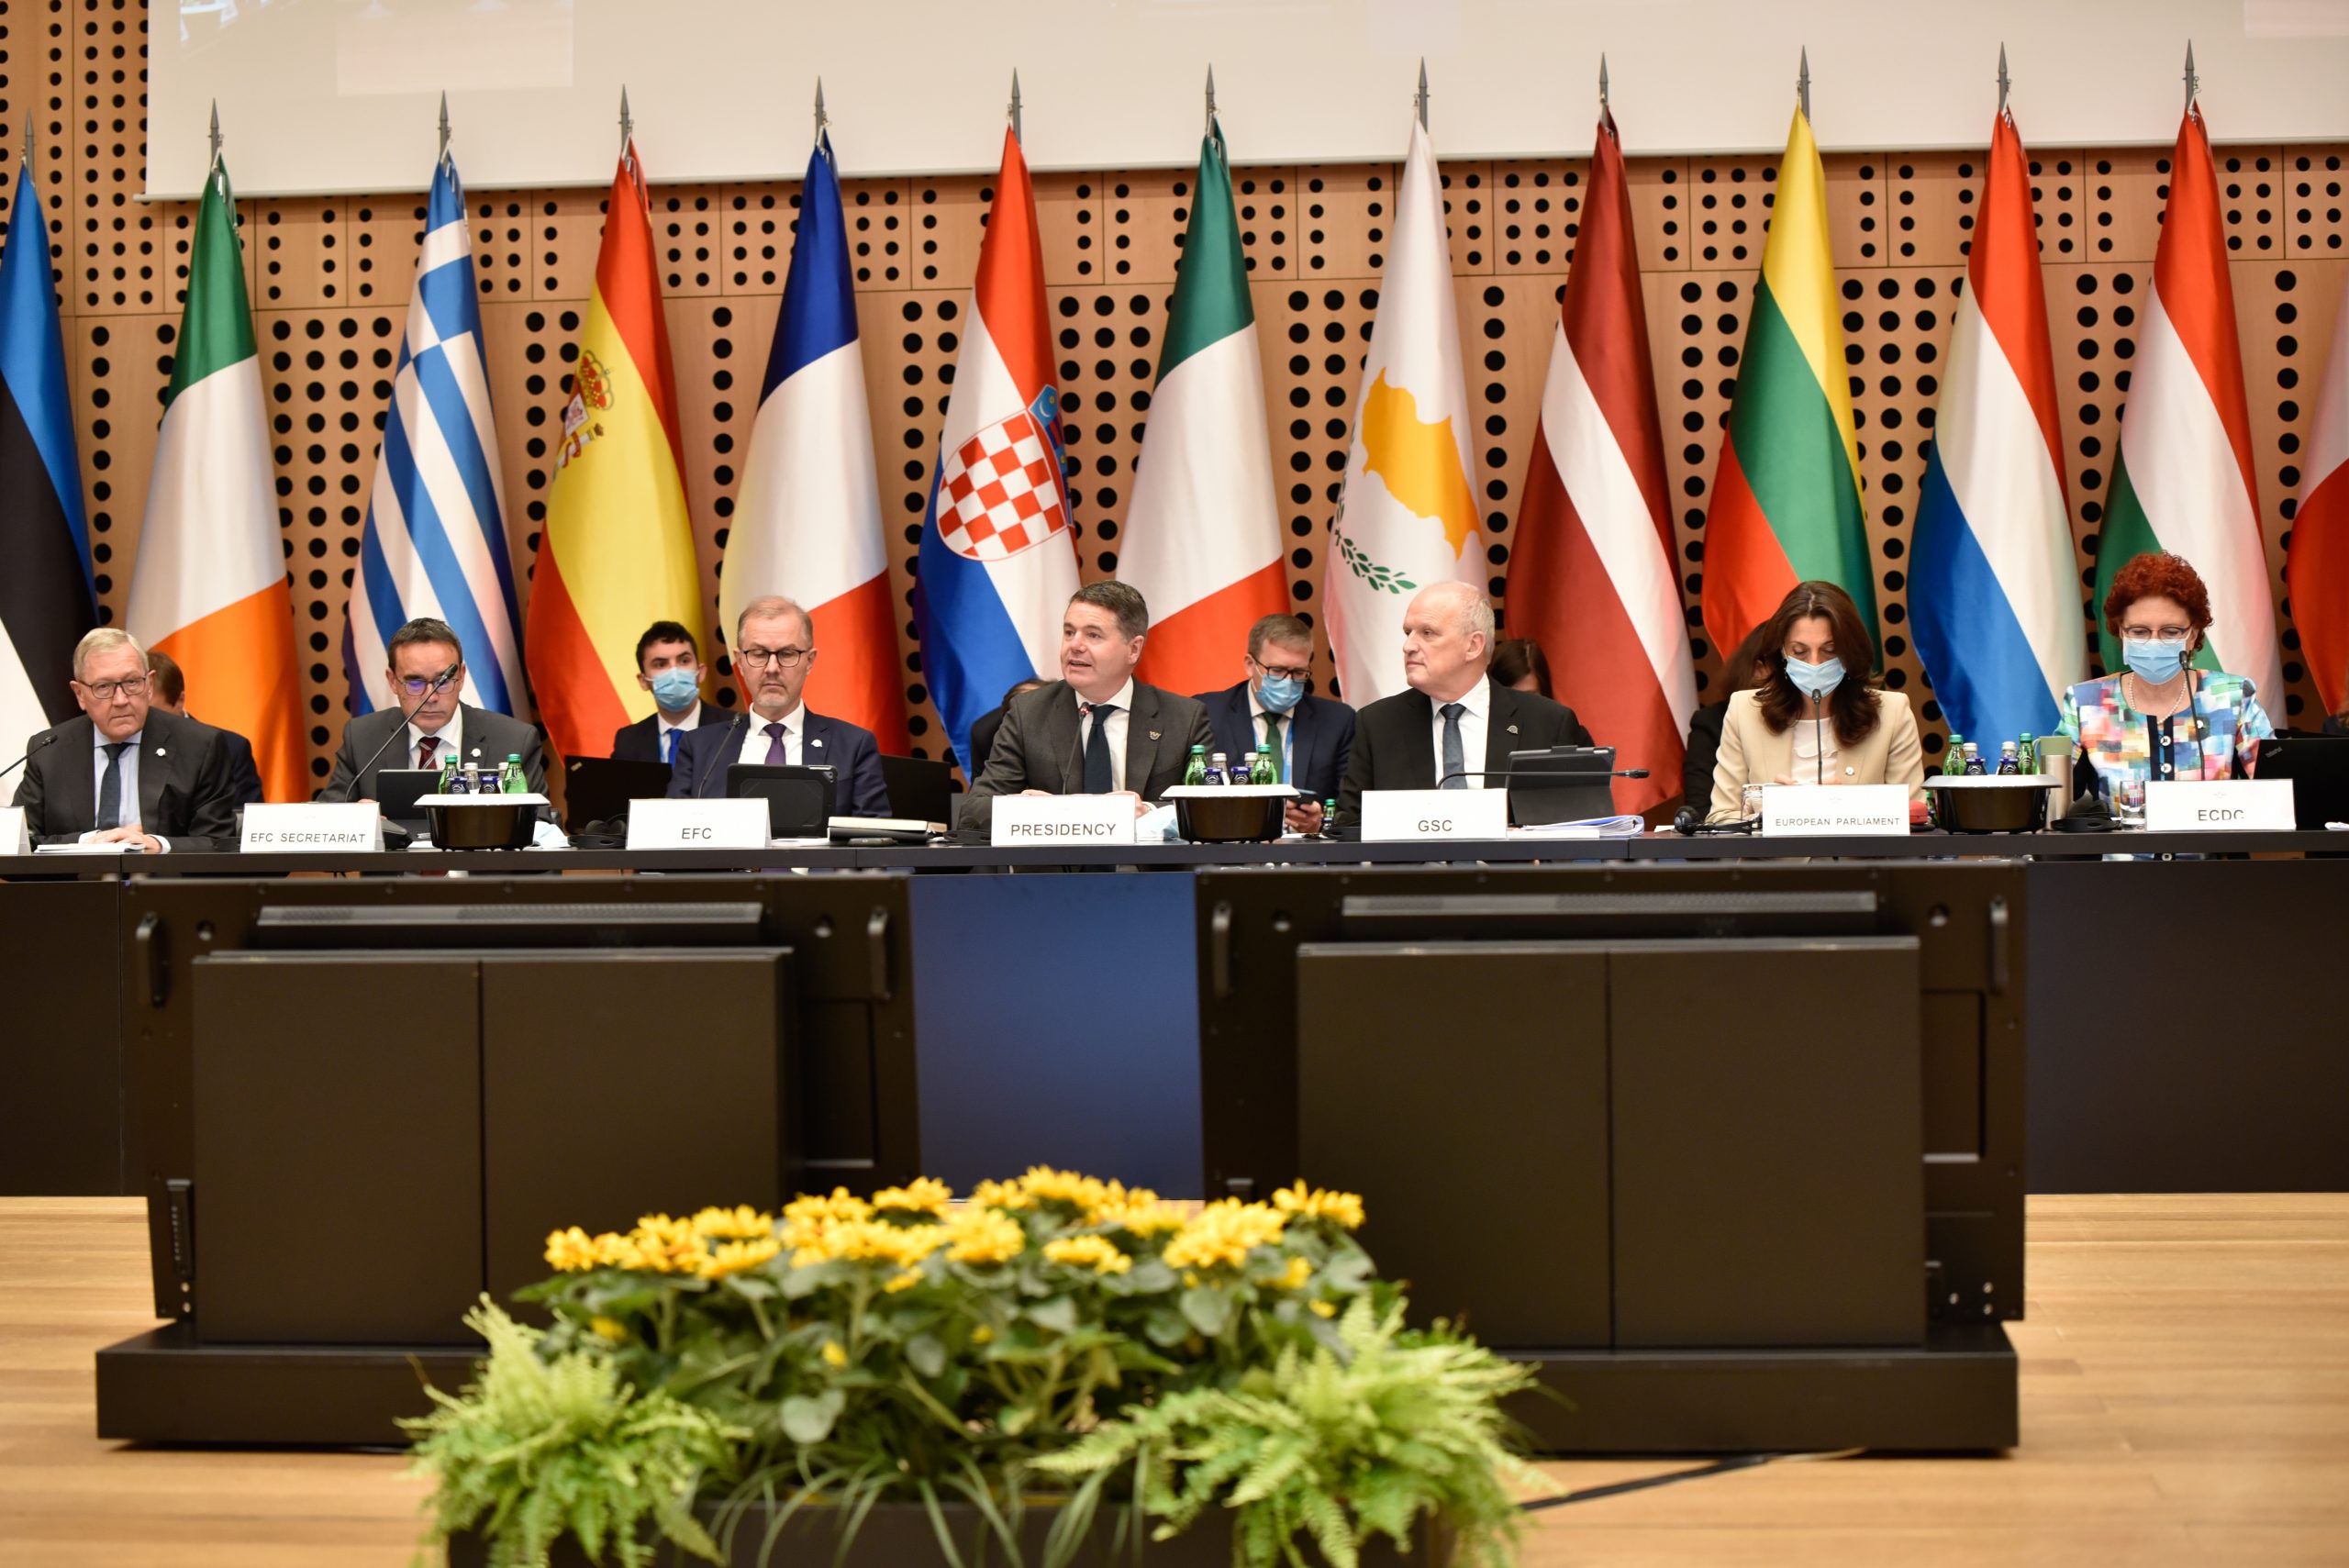 FinMin in Luxembourg for the Eurogroup and Ecofin meetings